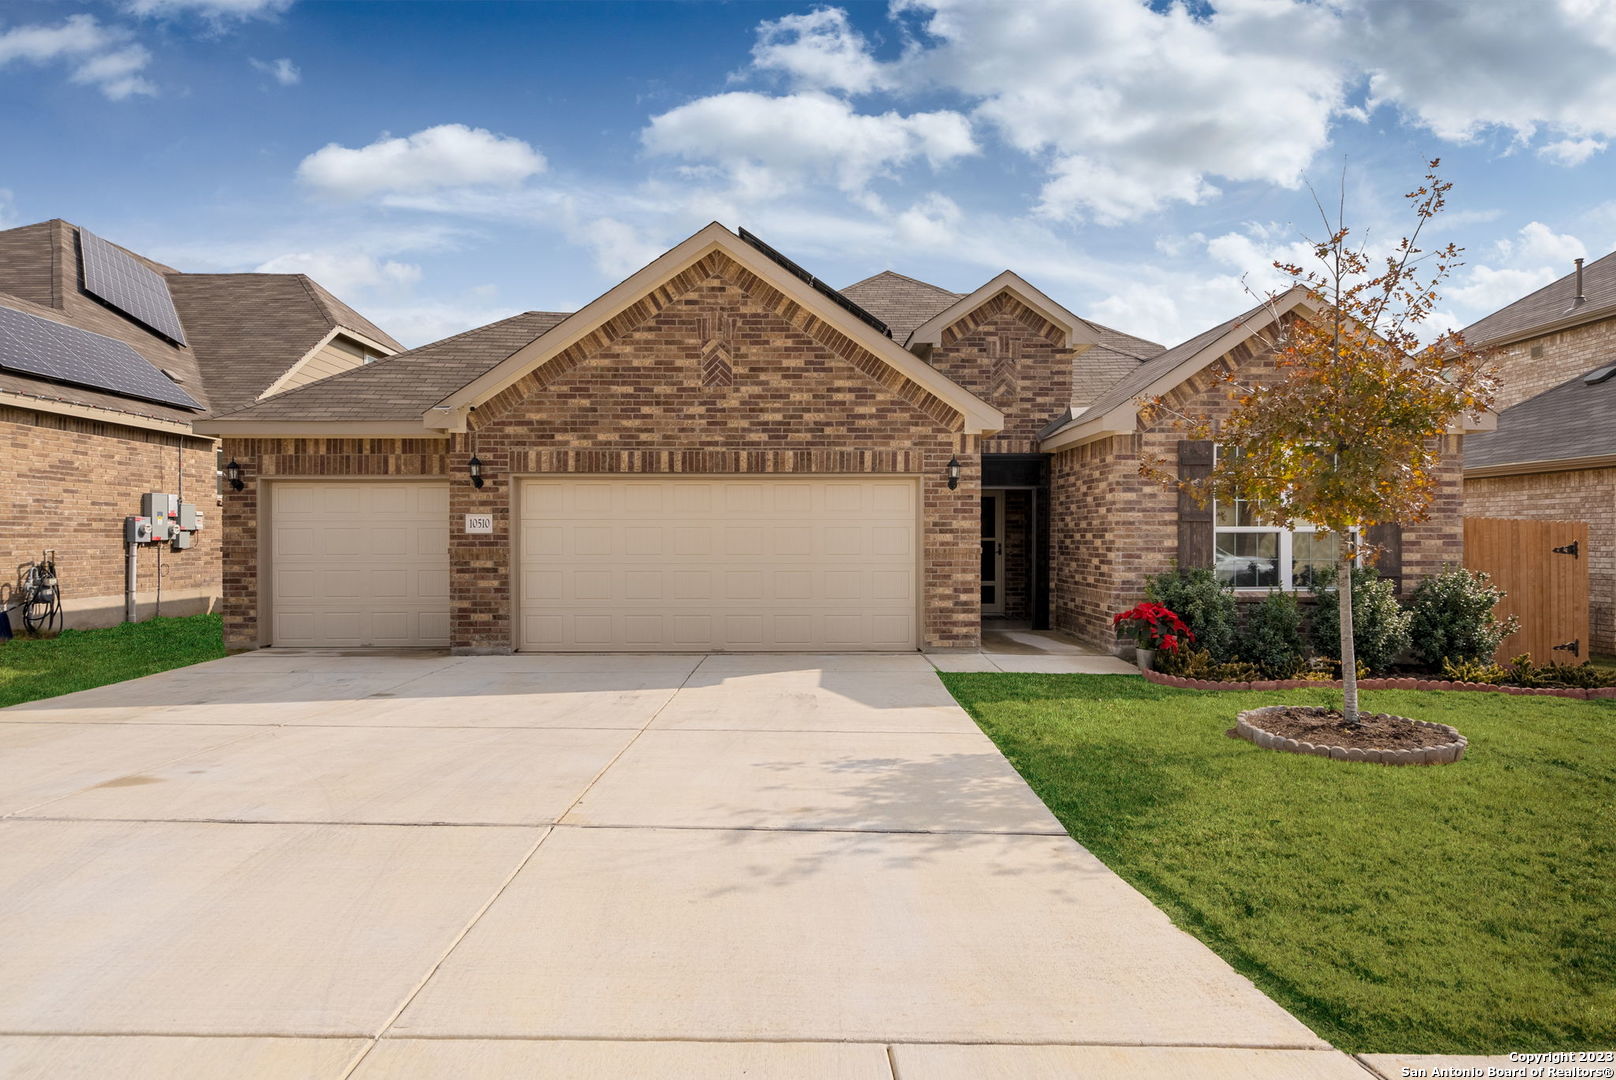 ** Open house 01/14(Sat) & 01/15(Sun) @ 11AM to 2:30 PM **    **  OVERSIZED 3 CAR GARAGE, 4 BEDS, 3 FULL BATHS, 3022 SqFt, 2019 BUILT.    This home is totally energy independent, no need to worry about power outages with the Tesla batterywall! SUPER LOW ENERGY BILL!  The beautiful move-in ready home is located on a 60' x 120' lot on a green belt in the Davis Ranch Subdivision! This immaculate home features an open floor plan with a large living room, gorgeous kitchen, separate dining, the MASTER BED along with a secondary bedroom and office on the FIRST FLOOR, two bedrooms upstairs along with a huge game room, wood-like tiles throughout the main areas of the home, and only carpet in the bedrooms. The homeowners put so much love into this home with multiple upgrades, 2022 TESLA SOLAR PANELS WITH "POWERWALL HOME BATTERY" INSTALLED ON MARCH 2022!!!! That comes with a 25 year transferable warranty, owners paid over $46,000 for Tesla Solar Panels, sellers have a balance of $43,300 for solar panels and will pay off the balance with the purchase of the home, also with the    Tesla battery you'll never have to worry about any power outages.  The security system/cameras, epoxy garage floors, natural gas line on back patio for BBQ Grill, enclosed screened front porch with heavy duty security storm door, enclosed screen back patio with tiled flooring, remote controlled ceiling fans in every room, jetted master bathroom tub, custom glass shower door in upstairs bathroom, window tint, utility sink in the laundry room, extended back yard fencing along both sides of the home with two usable gates, new upgraded floor tiles on the main floor of home completed in December 2022, and upgraded irrigation for the garden.  Water softener is paid in full! OVER $85,000 IN UPGRADES!  Zoned for Northside ISD schools to include the newest NISD High School Sotomayor High School, quick access to the highways, minutes away from JBSA Bases, and a short drive to local stores and great restaurants. Schedule your showing appointment today to see this wonderful home!